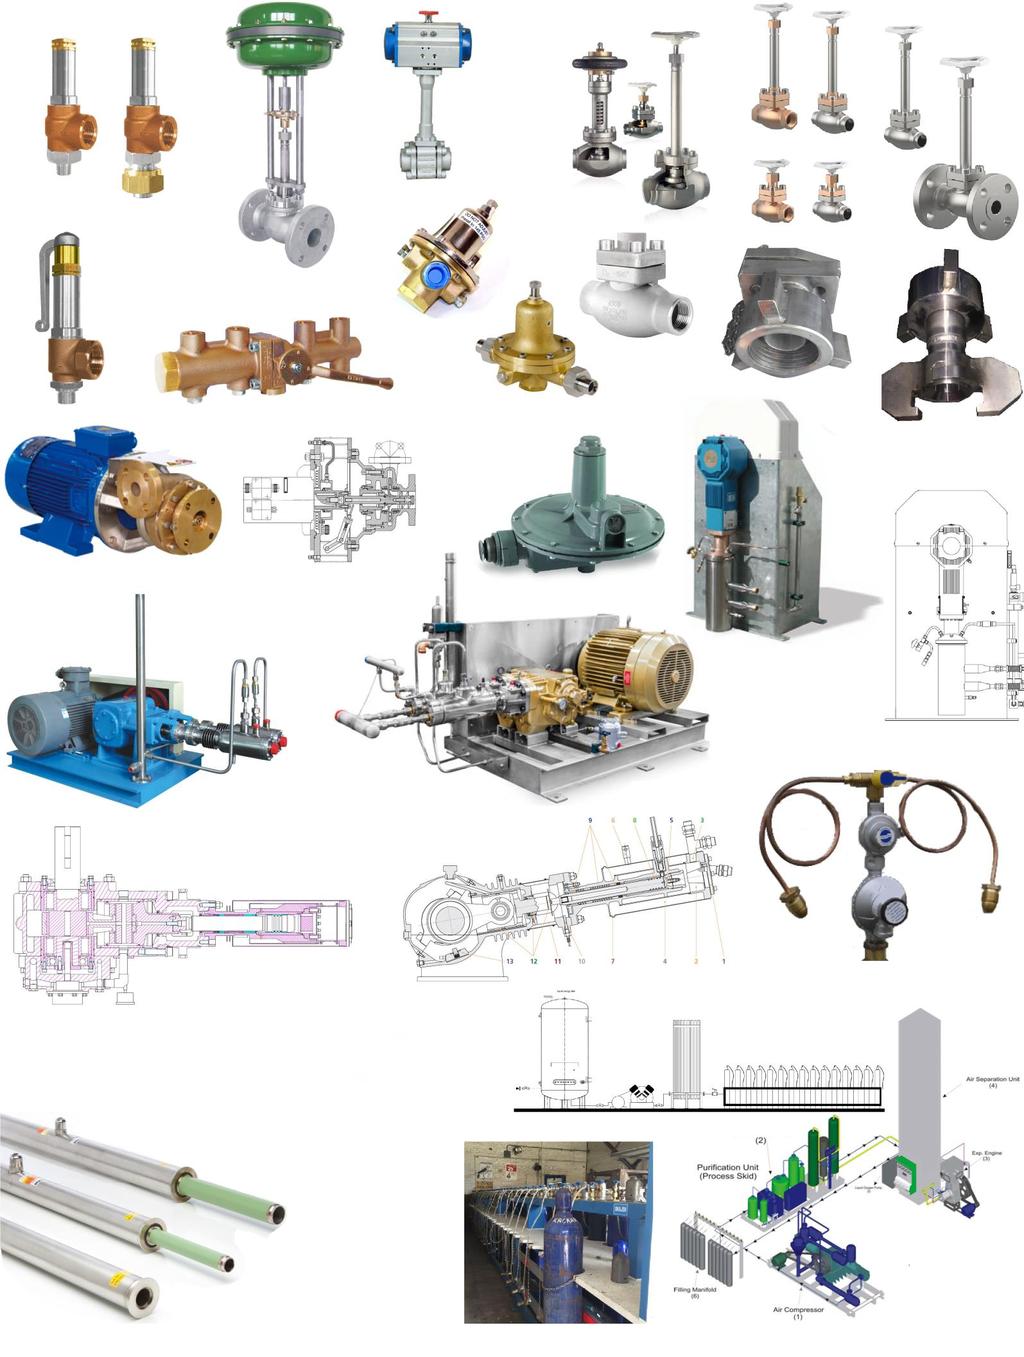 LNG and Cryogenic Pump, Valves, Level gauges, Relief valves,